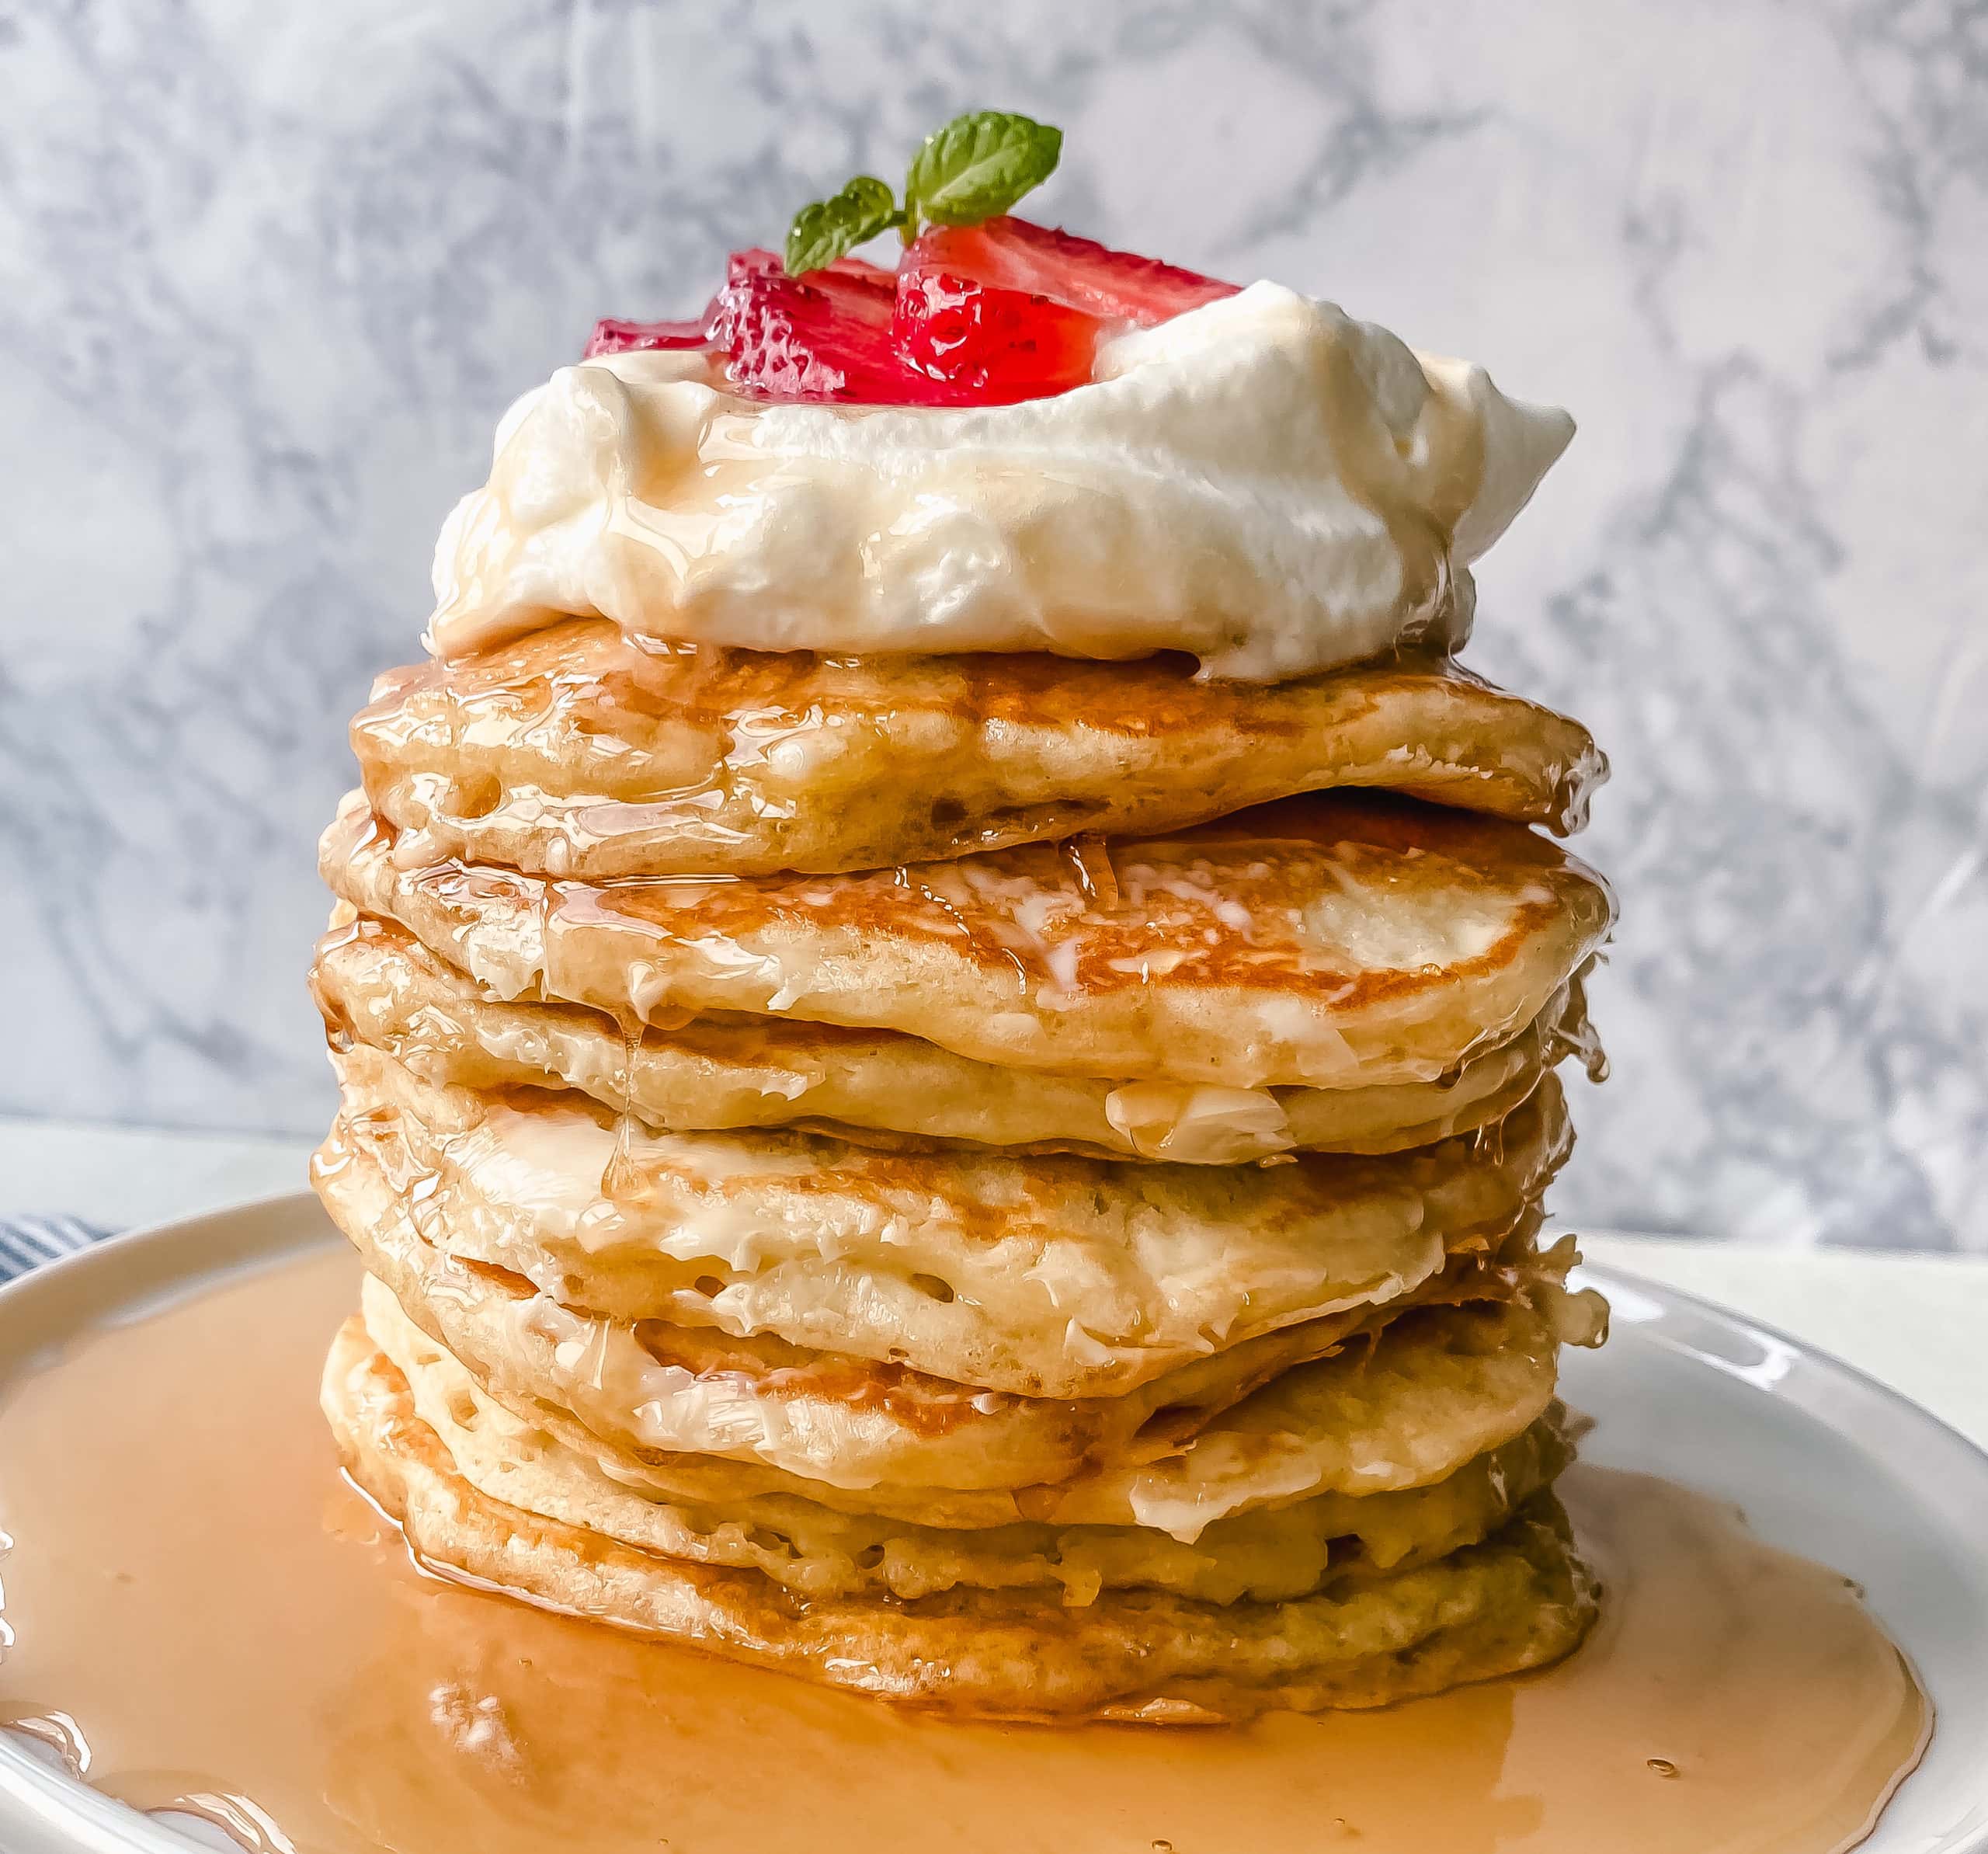 BEST BUTTERMILK PANCAKES. The best homemade buttermilk pancake recipe! This is the only pancake recipe you will ever need. Tender texture, light and fluffy, and these pancakes will melt in your mouth!